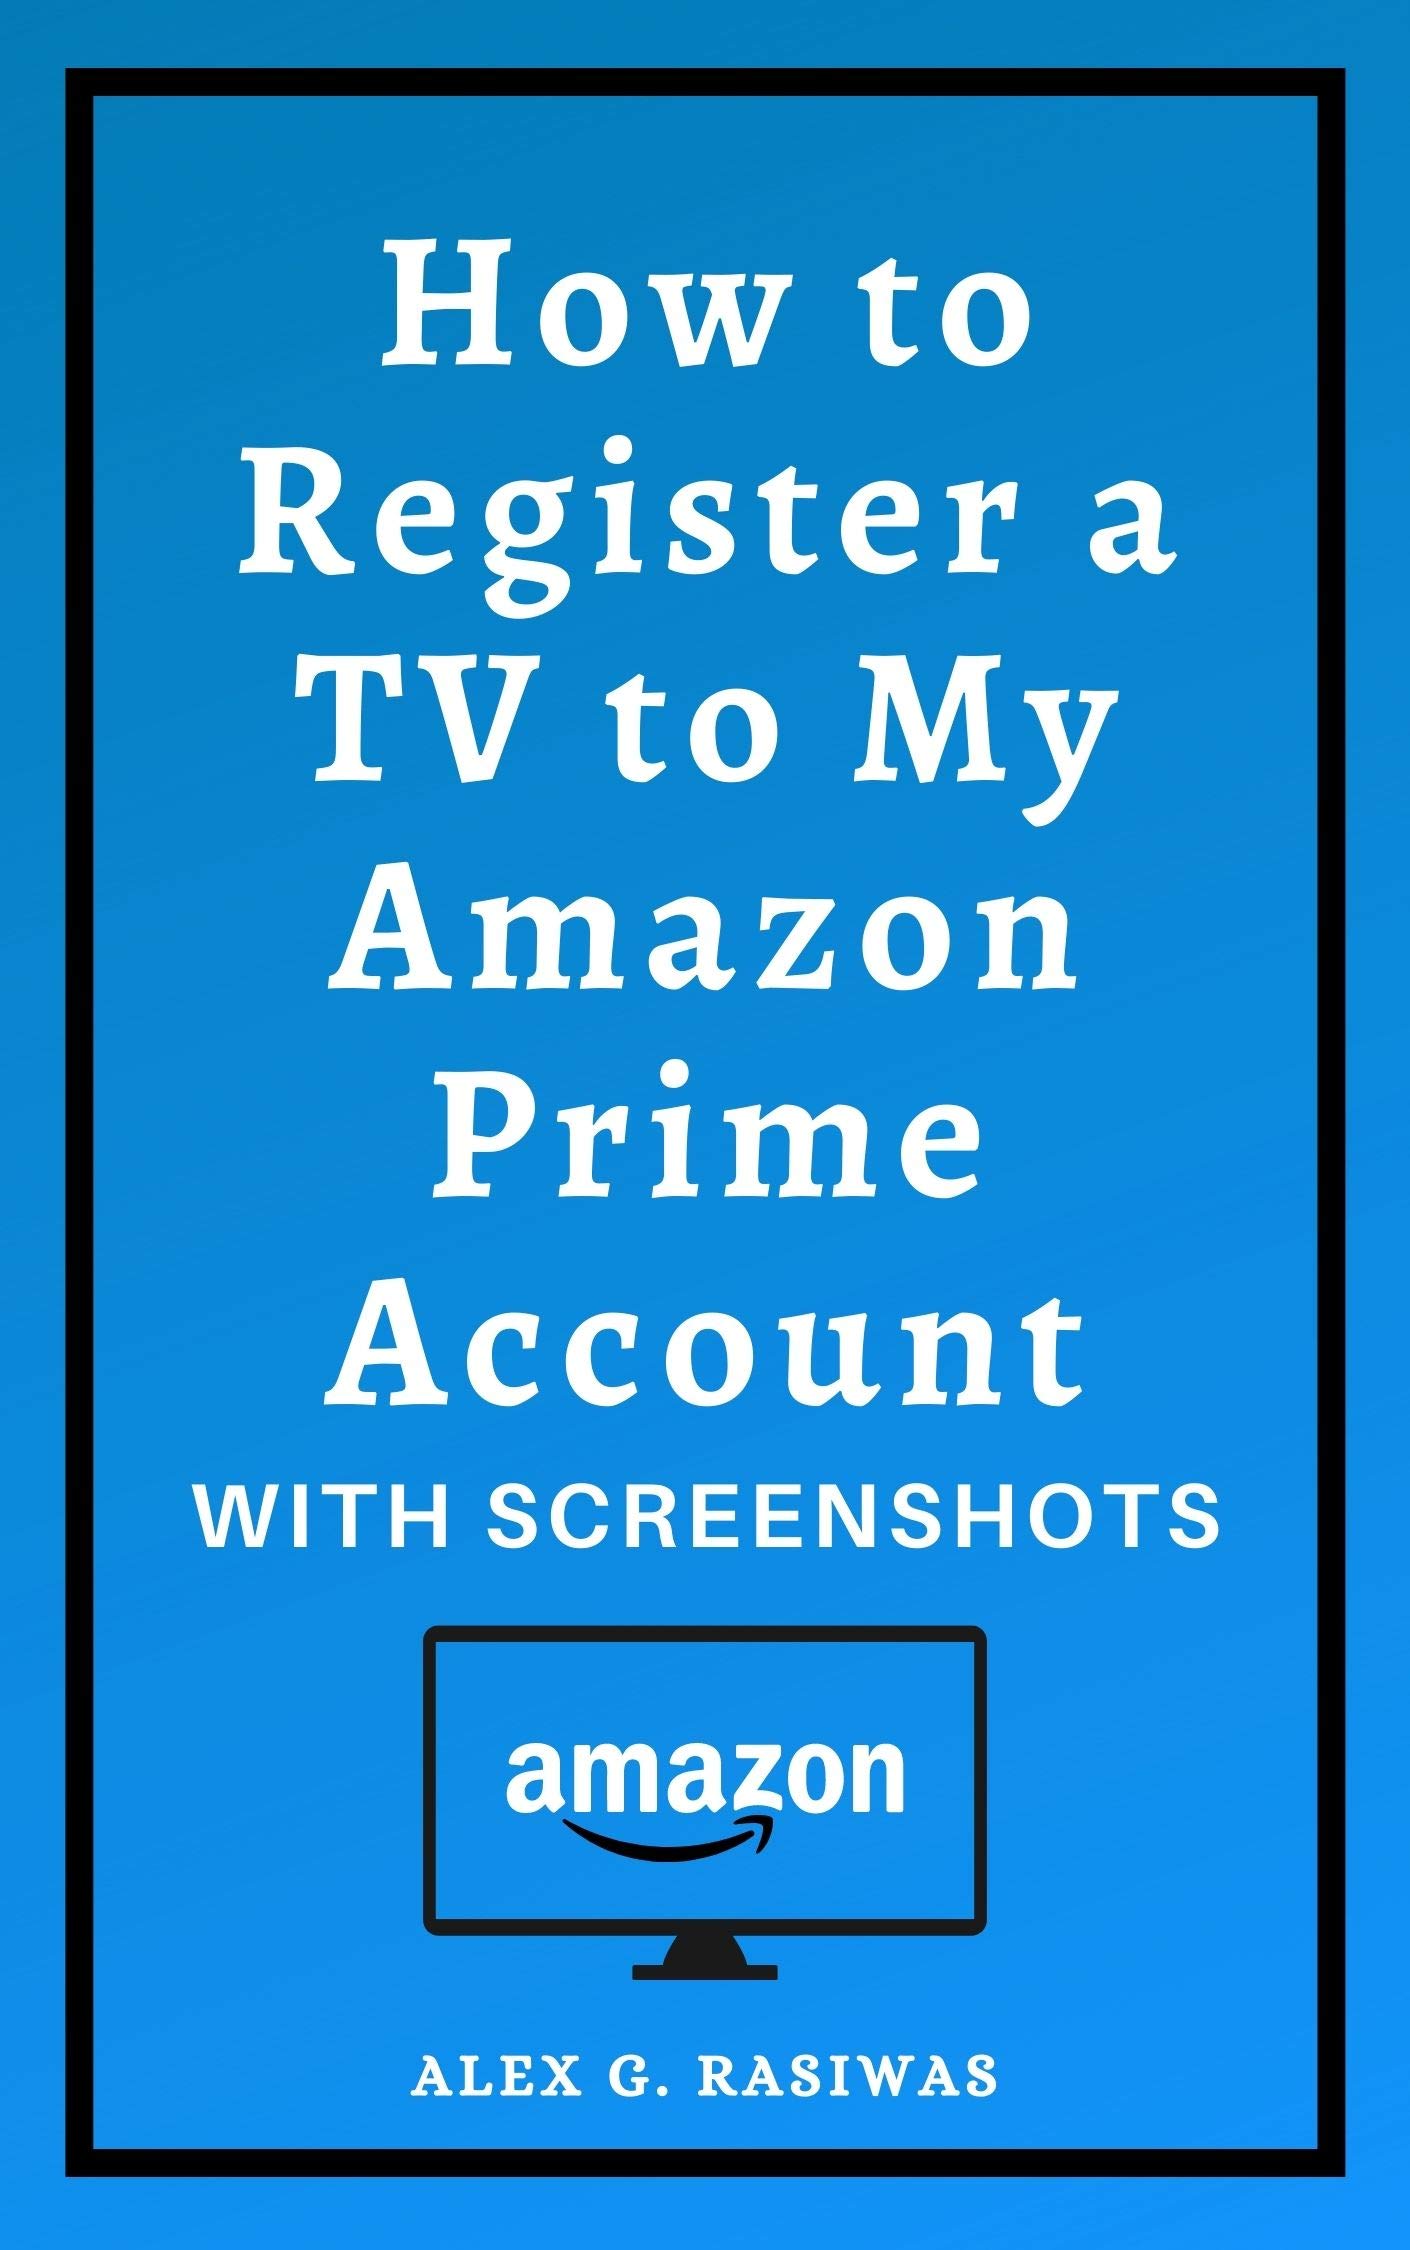 How to Register a TV to My Amazon Prime Account: Complete guide on How to Register Tv For Amazon Prime Video in less than 30 seconds with screenshots. (Amazon Mastery)